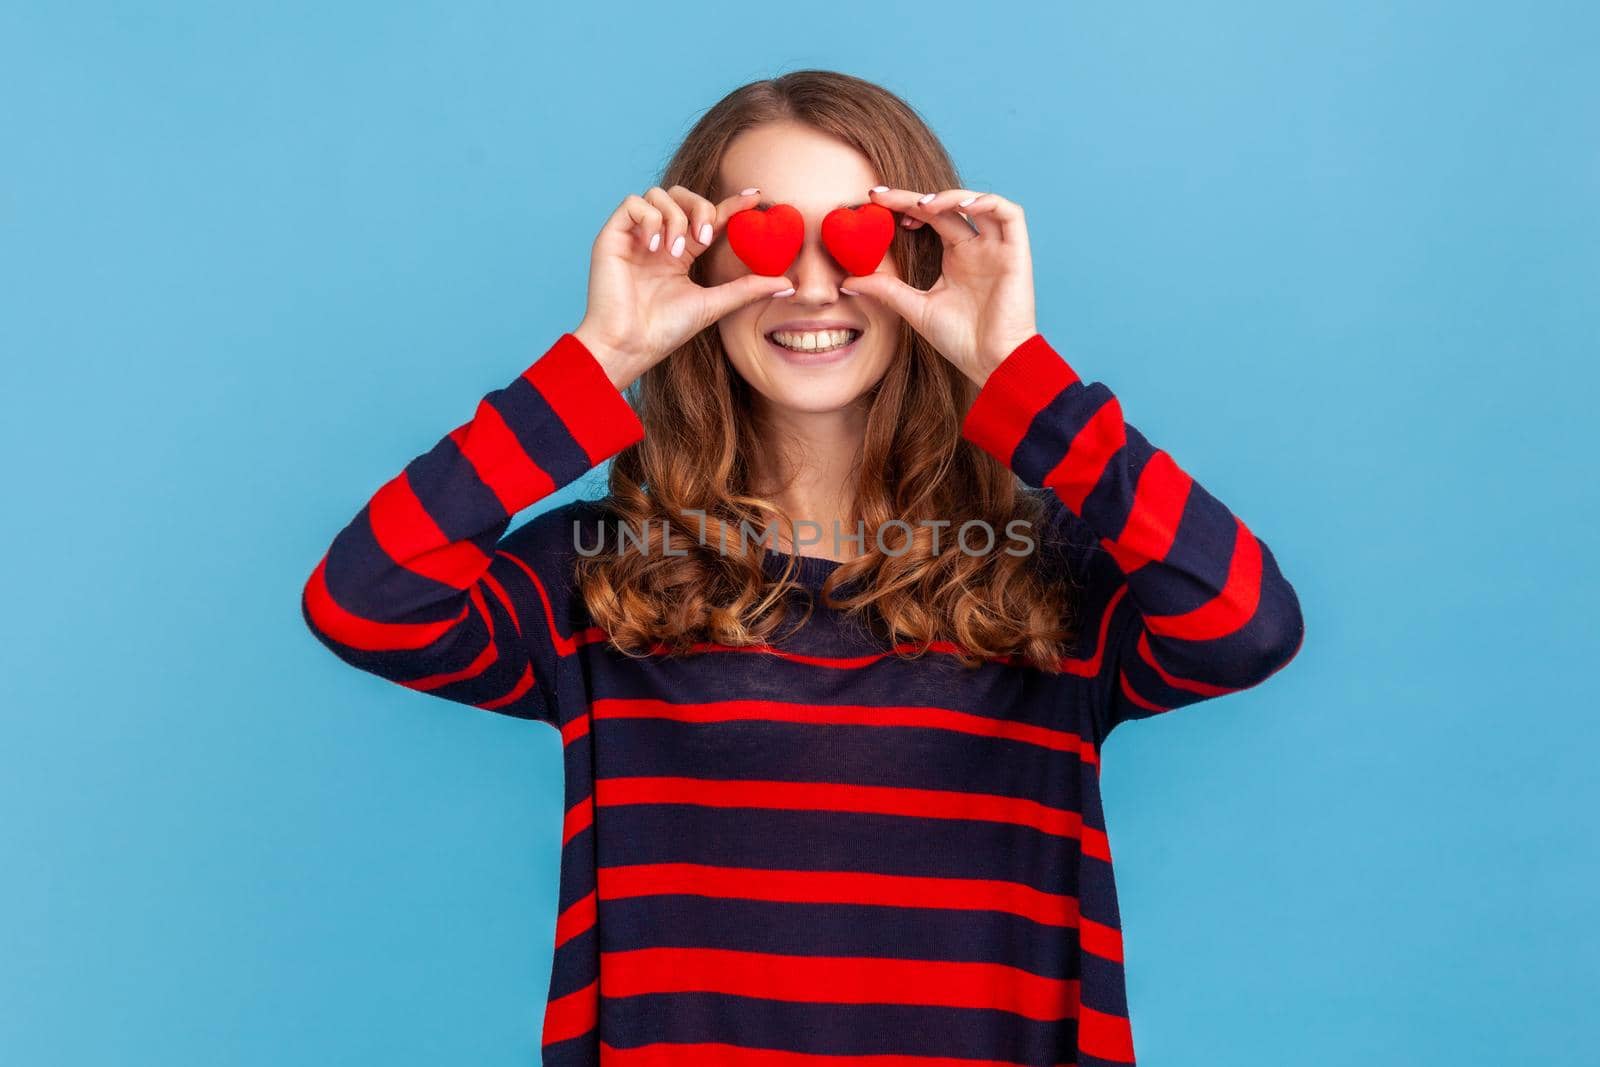 Funny positive woman wearing striped casual style sweater, covering eyes with small red hearts, love symbol, smiling toothily, falling in love. Indoor studio shot isolated on blue background.